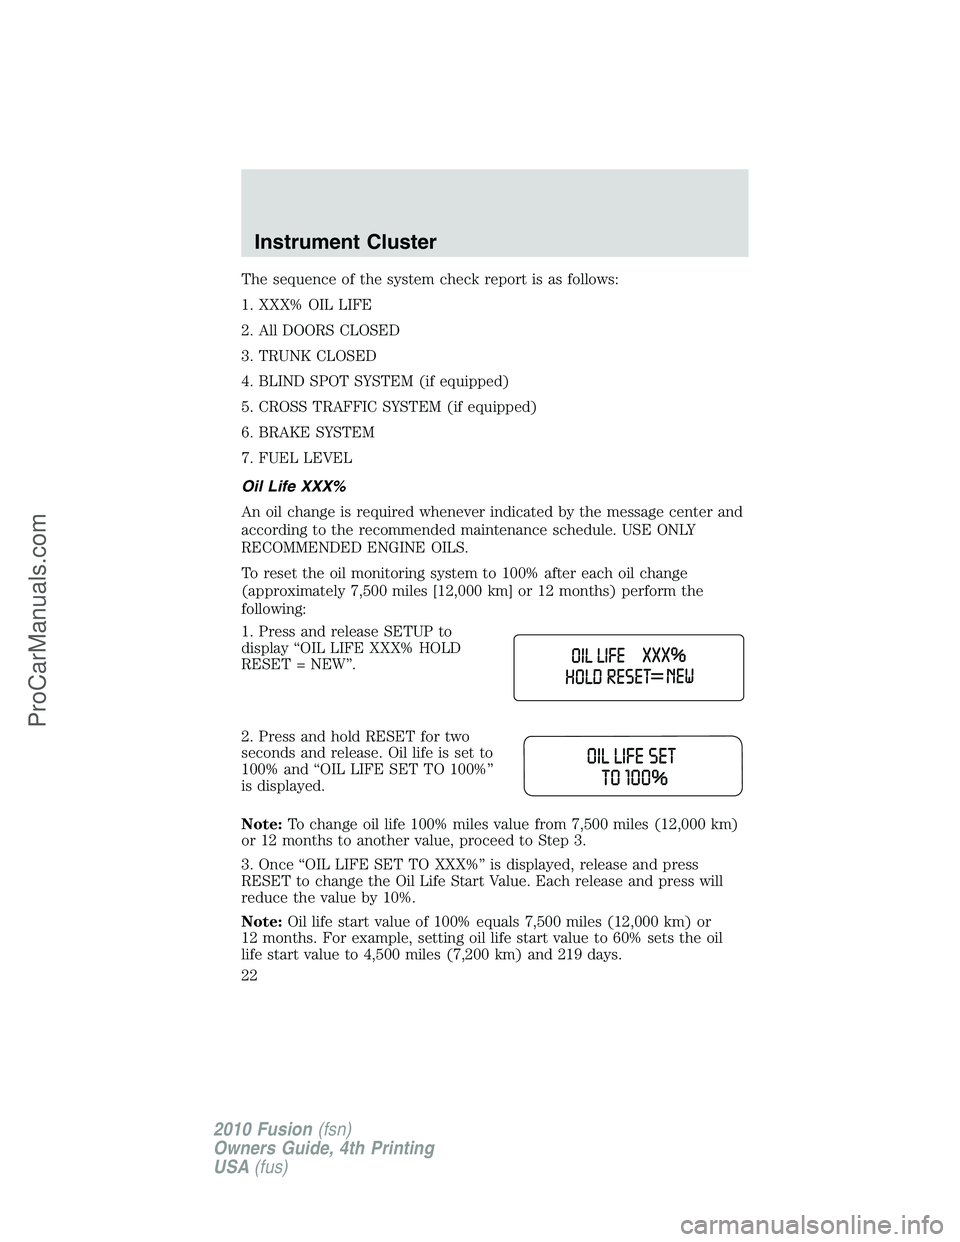 FORD FUSION 2010  Owners Manual The sequence of the system check report is as follows:
1. XXX% OIL LIFE
2. All DOORS CLOSED
3. TRUNK CLOSED
4. BLIND SPOT SYSTEM (if equipped)
5. CROSS TRAFFIC SYSTEM (if equipped)
6. BRAKE SYSTEM
7. 